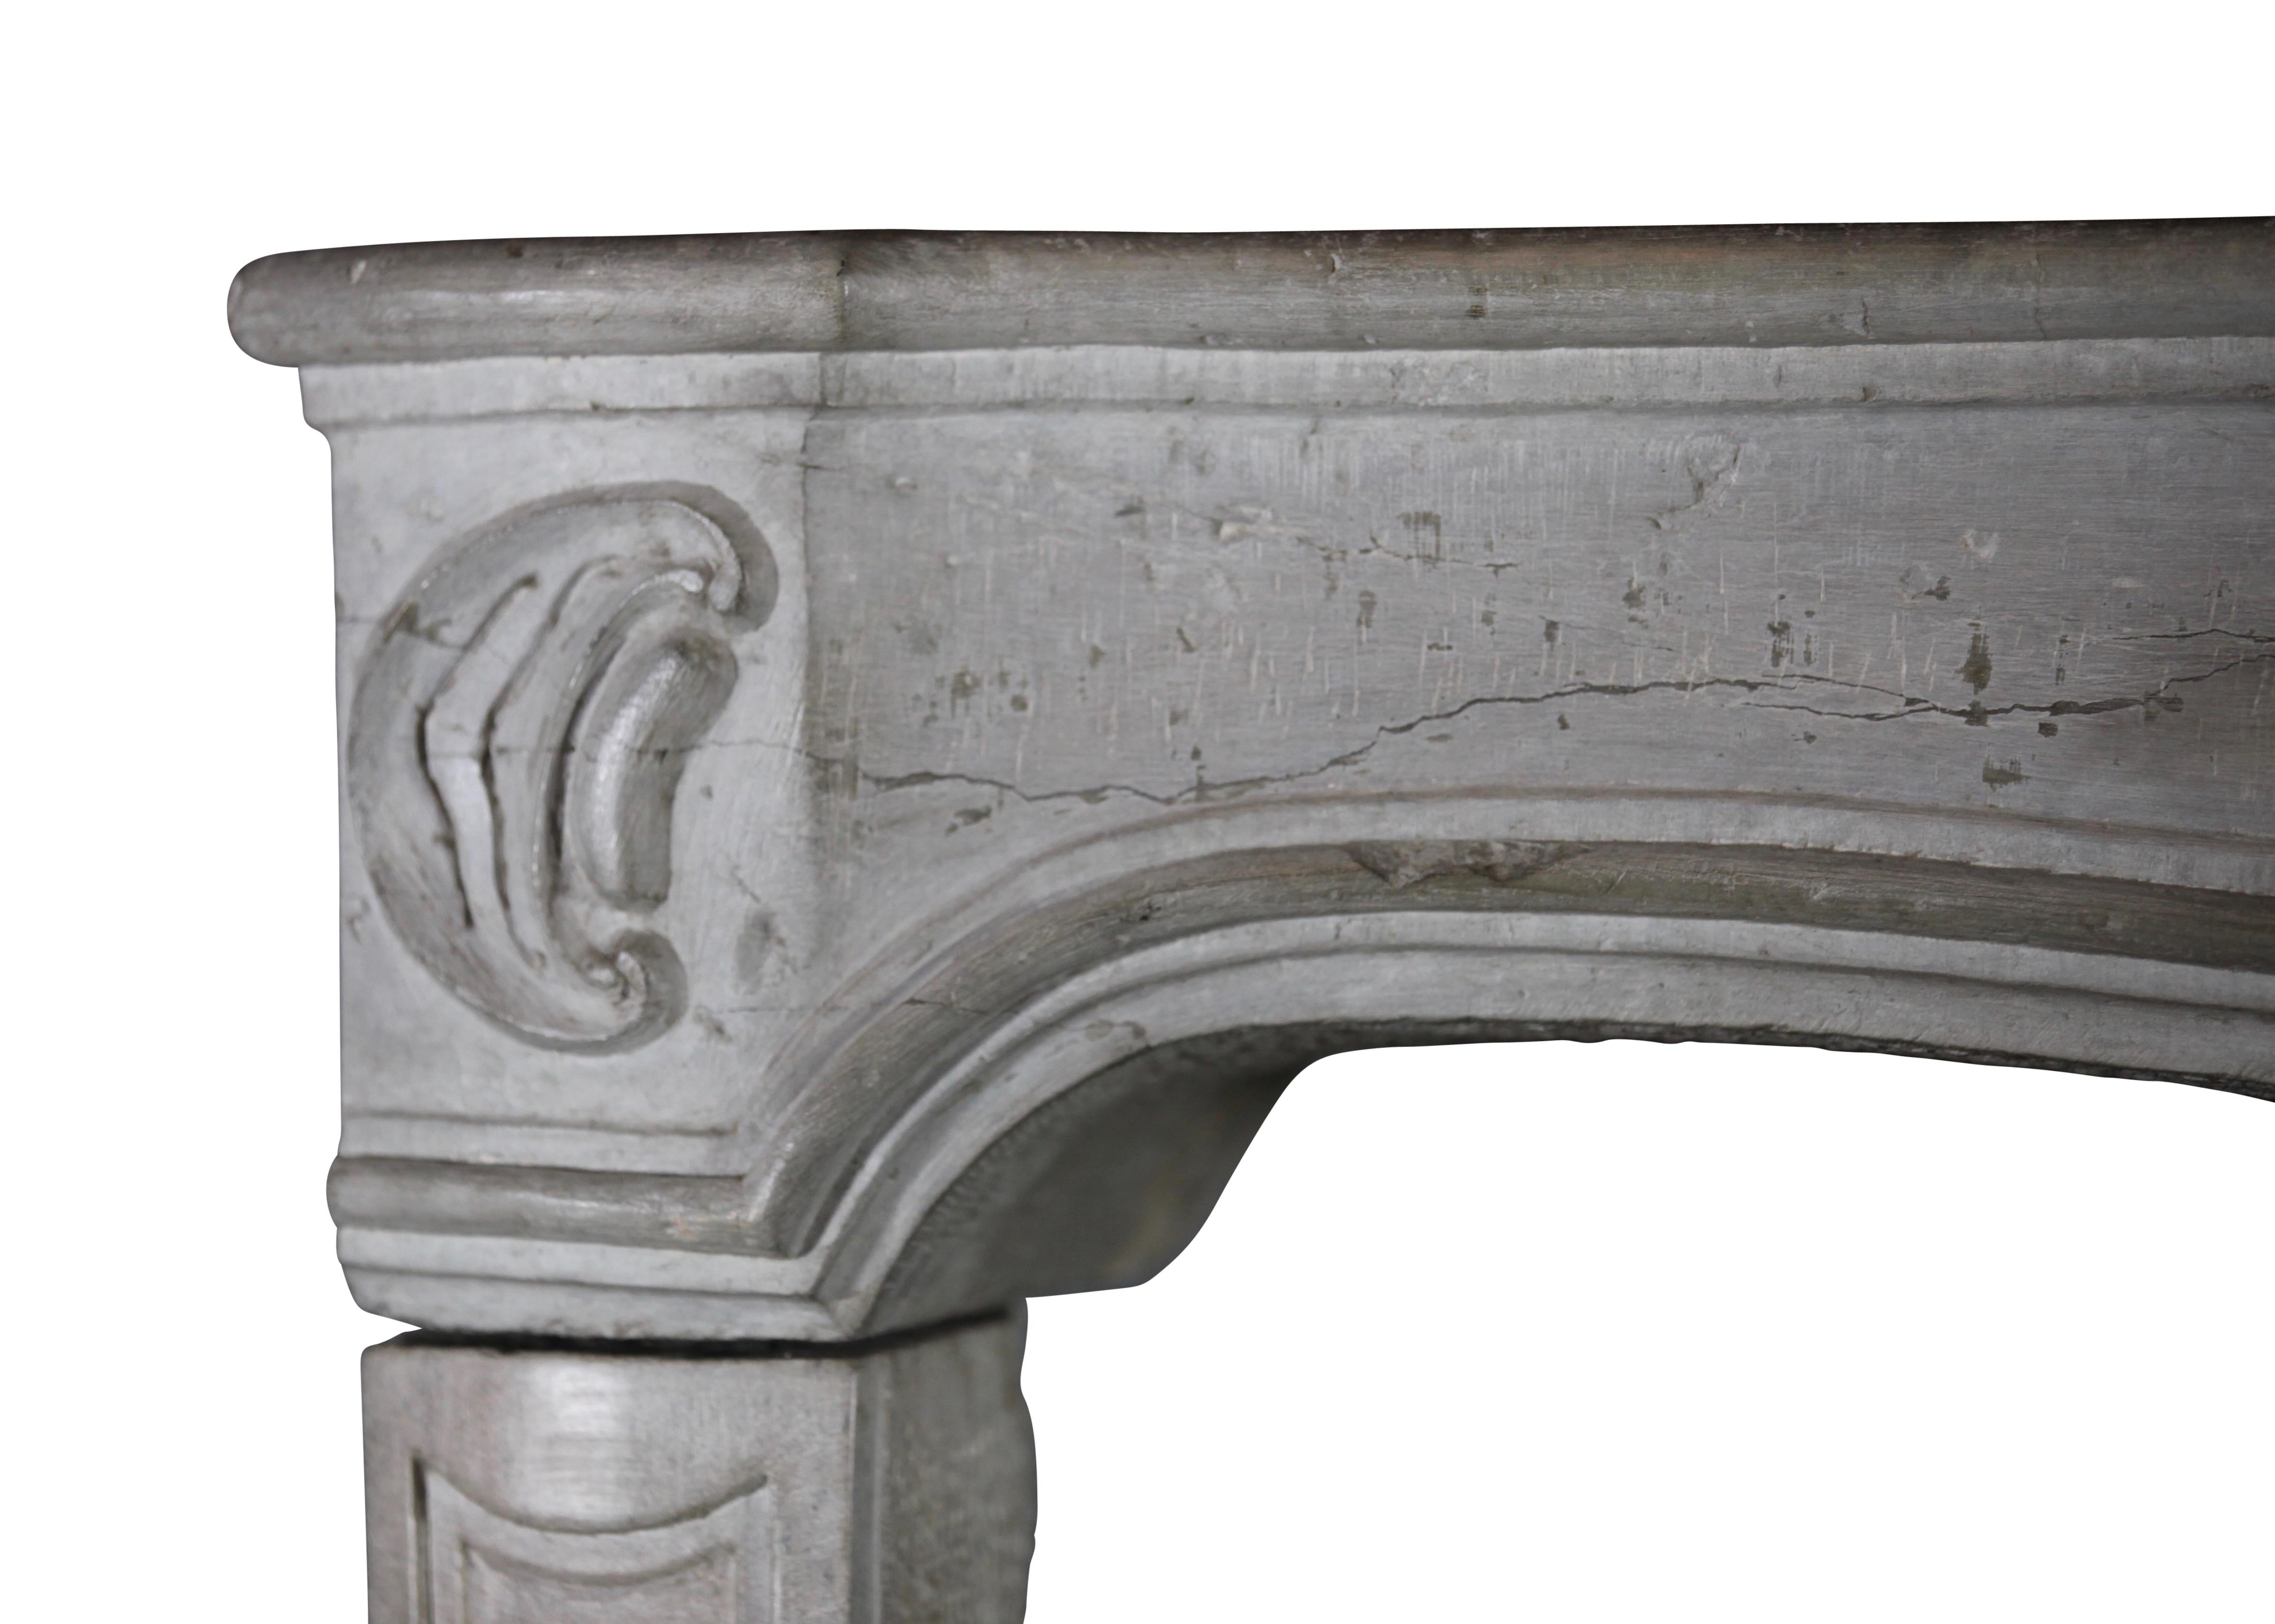 Different bicolor Louis XIV period mantel in Burgundy hard stone. Interesting is the different color, shades in the mantel. The shelf shows the detail of the work of the maker. It origines of the 18th century and can work in a rustic chique home